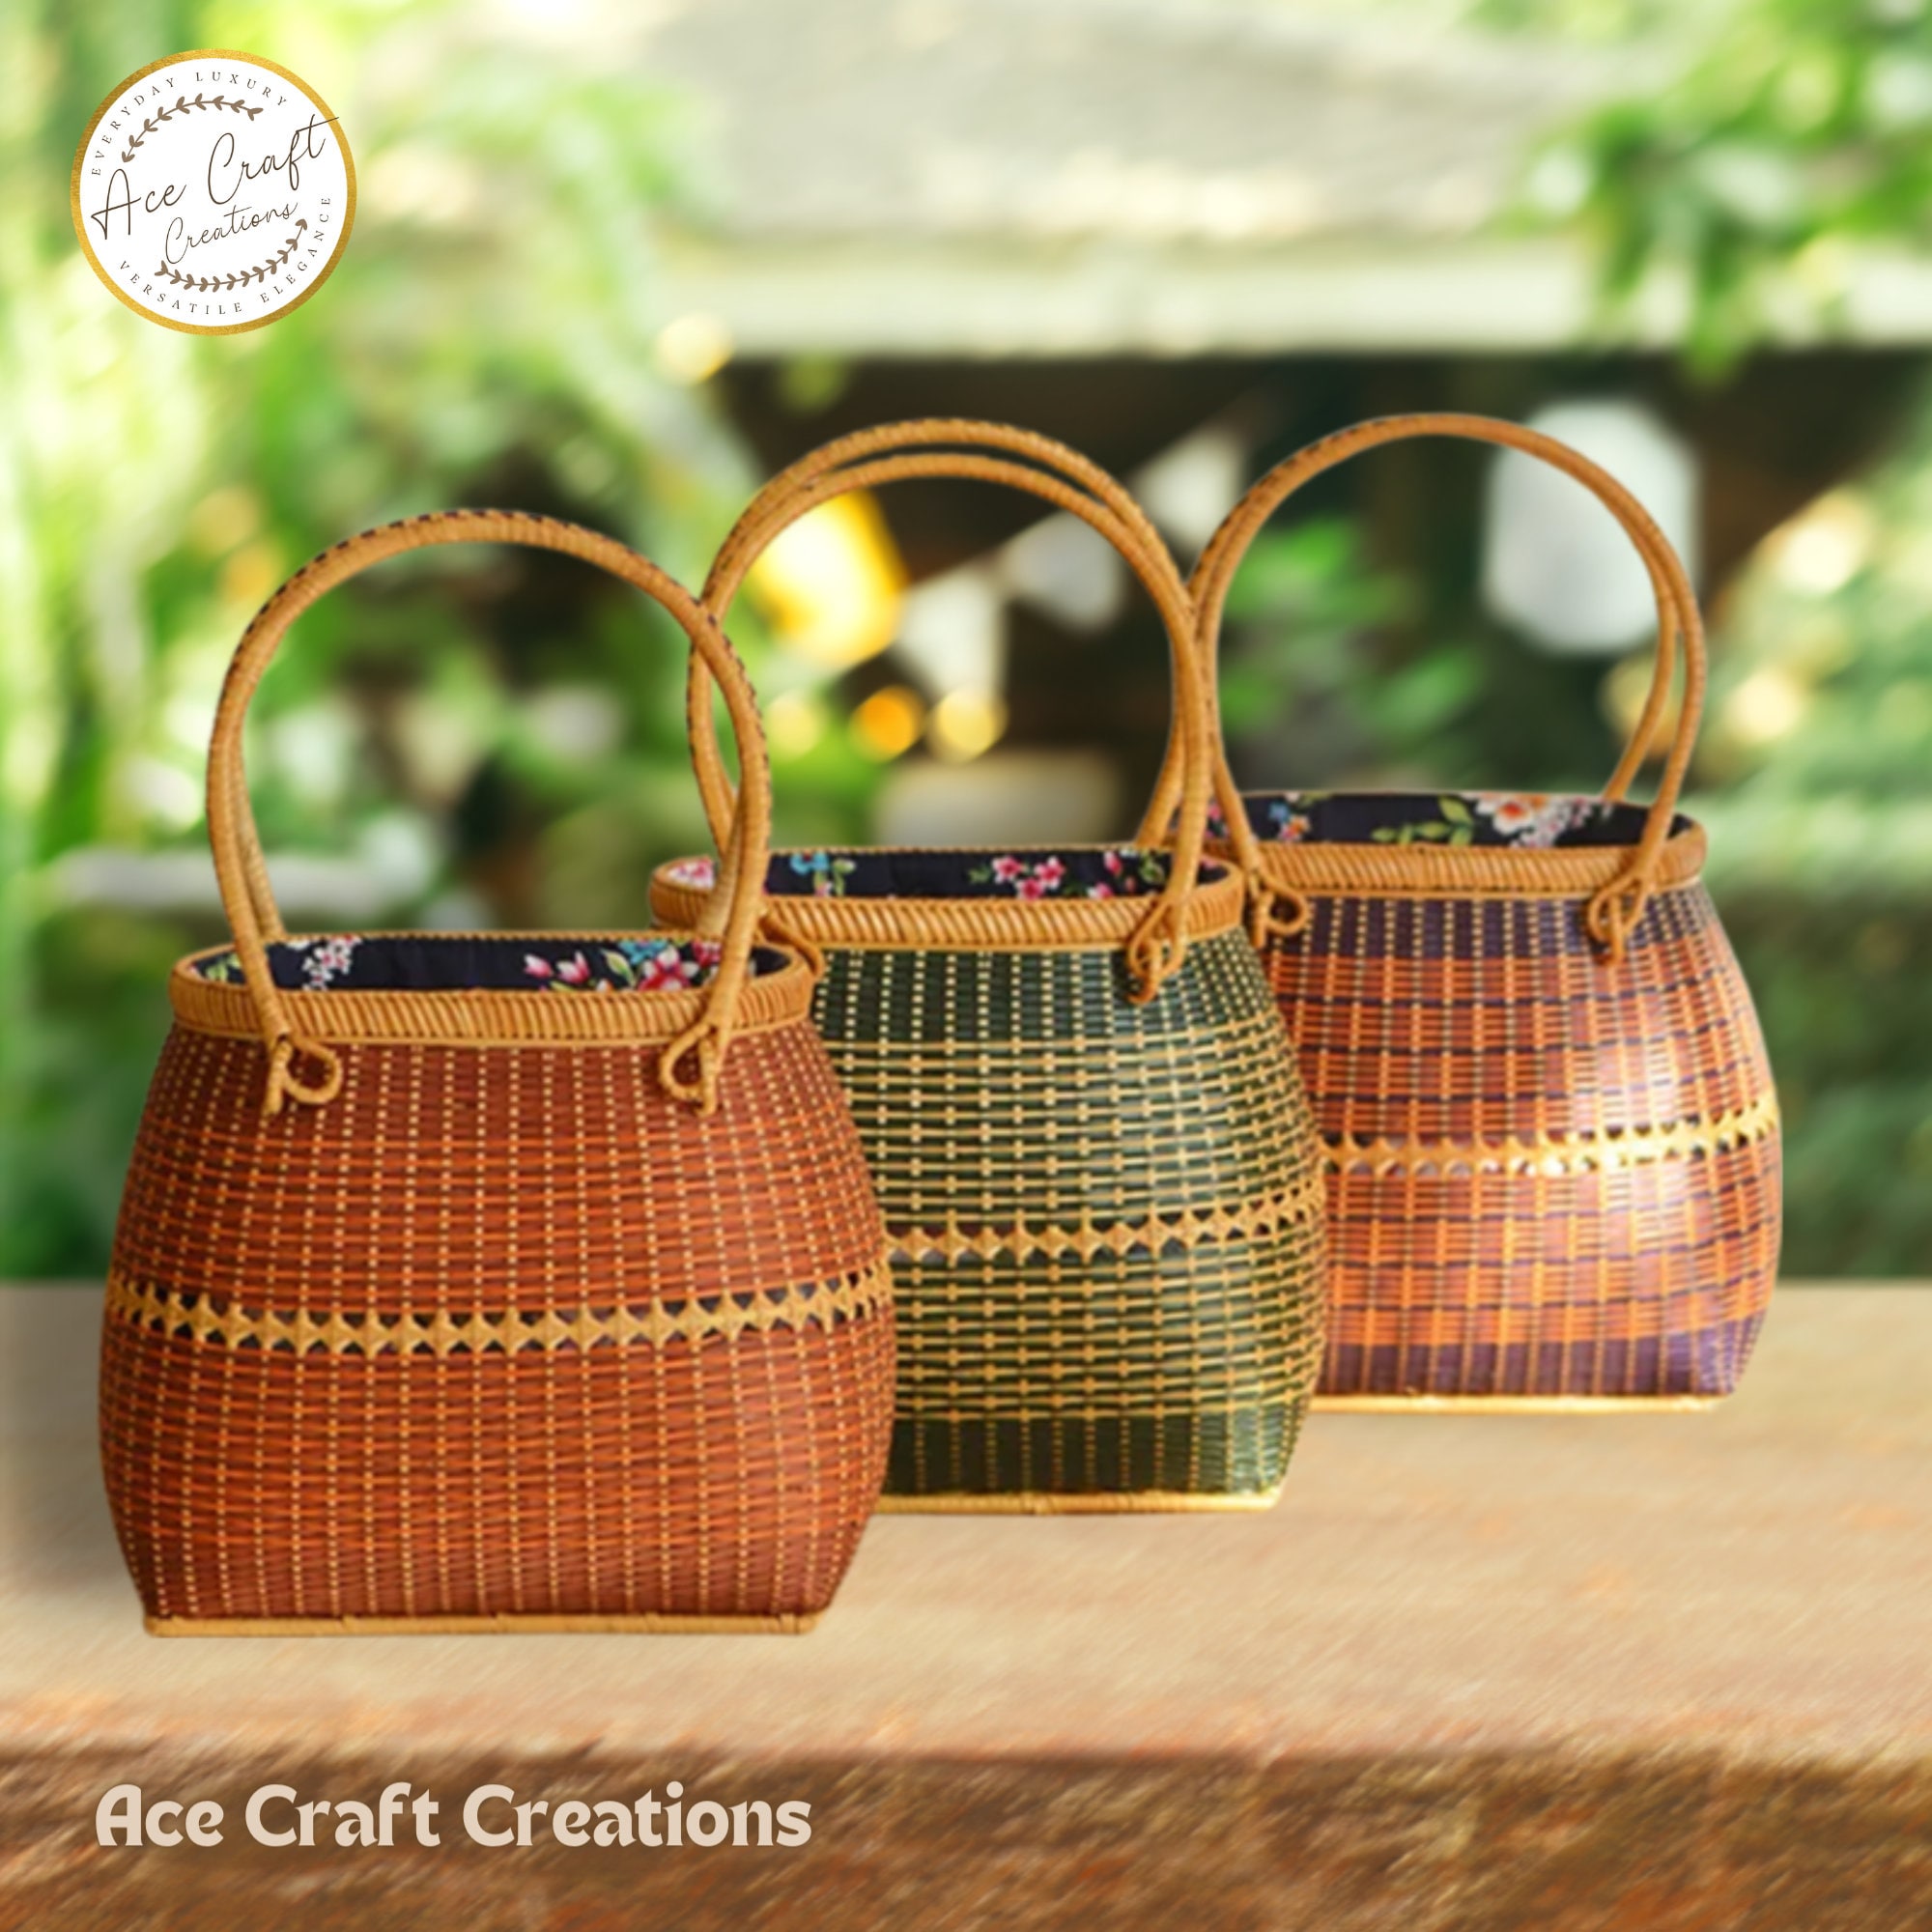 Handwoven Bamboo Handbag of square shape with leather straps and